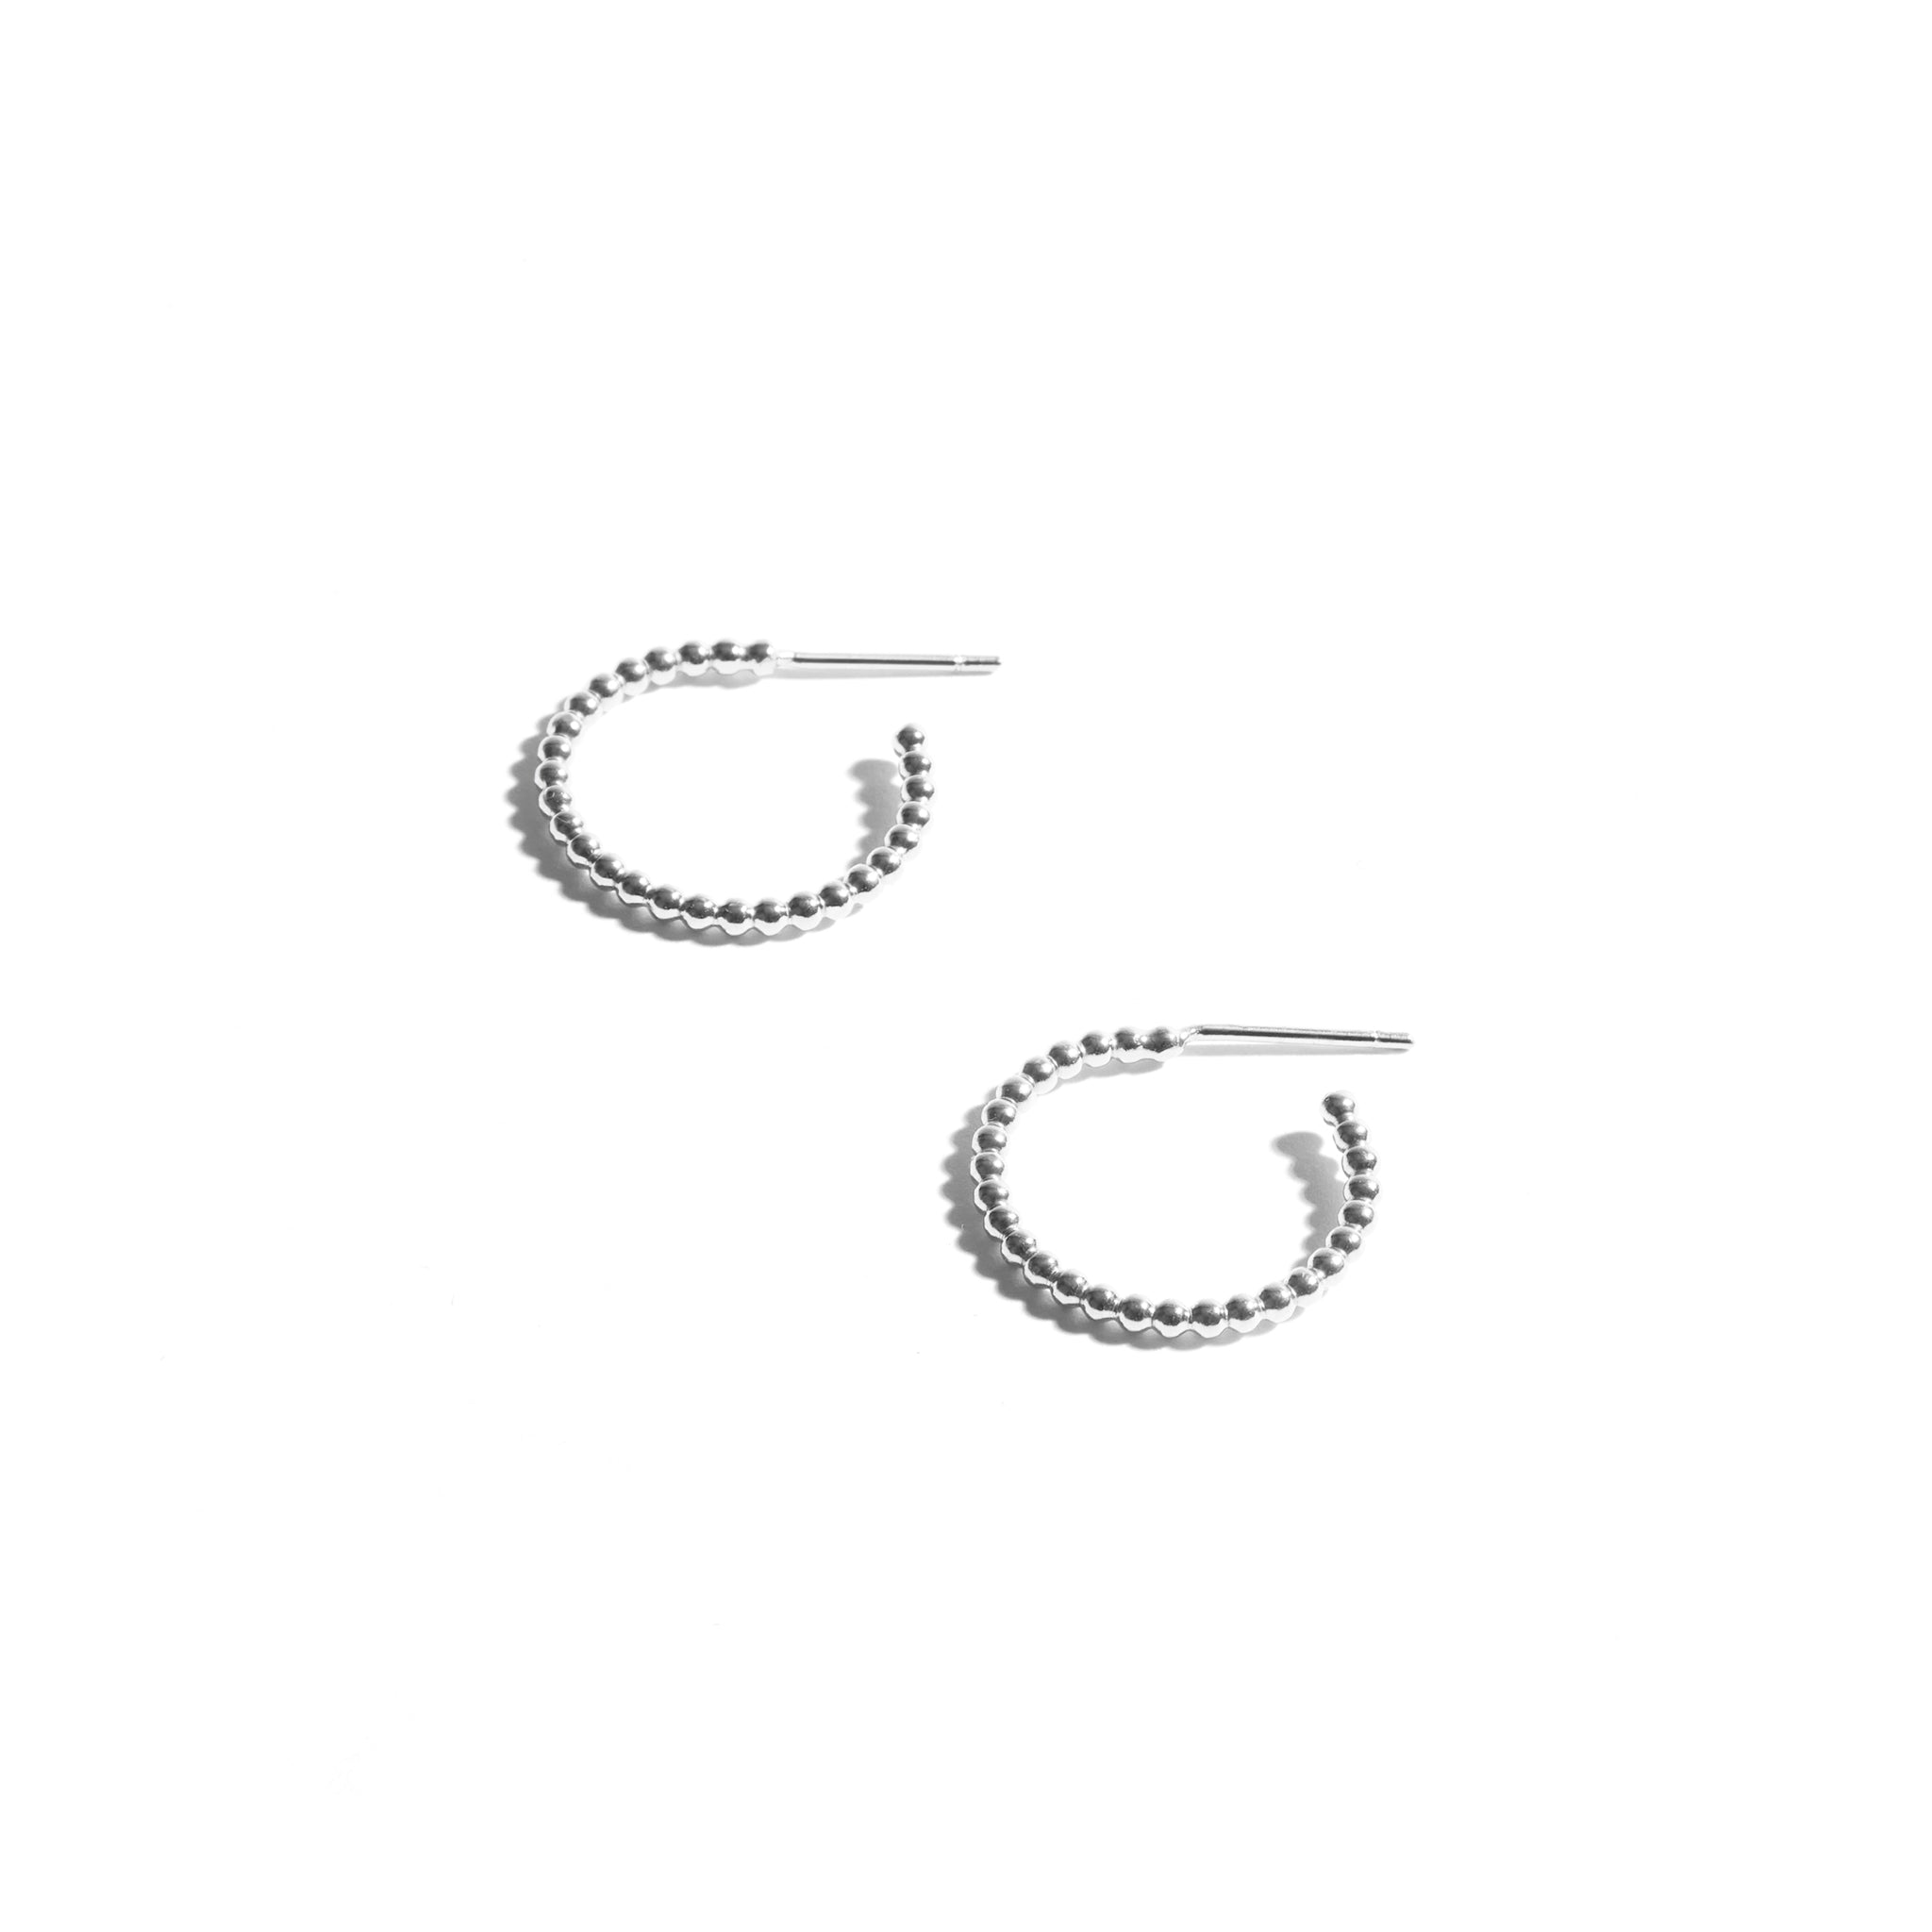 Stylish Medium Bubble Hoop Earrings made from Sterling Silver, featuring a textured design with small bubbles, perfect for adding a touch of charm to any outfit.